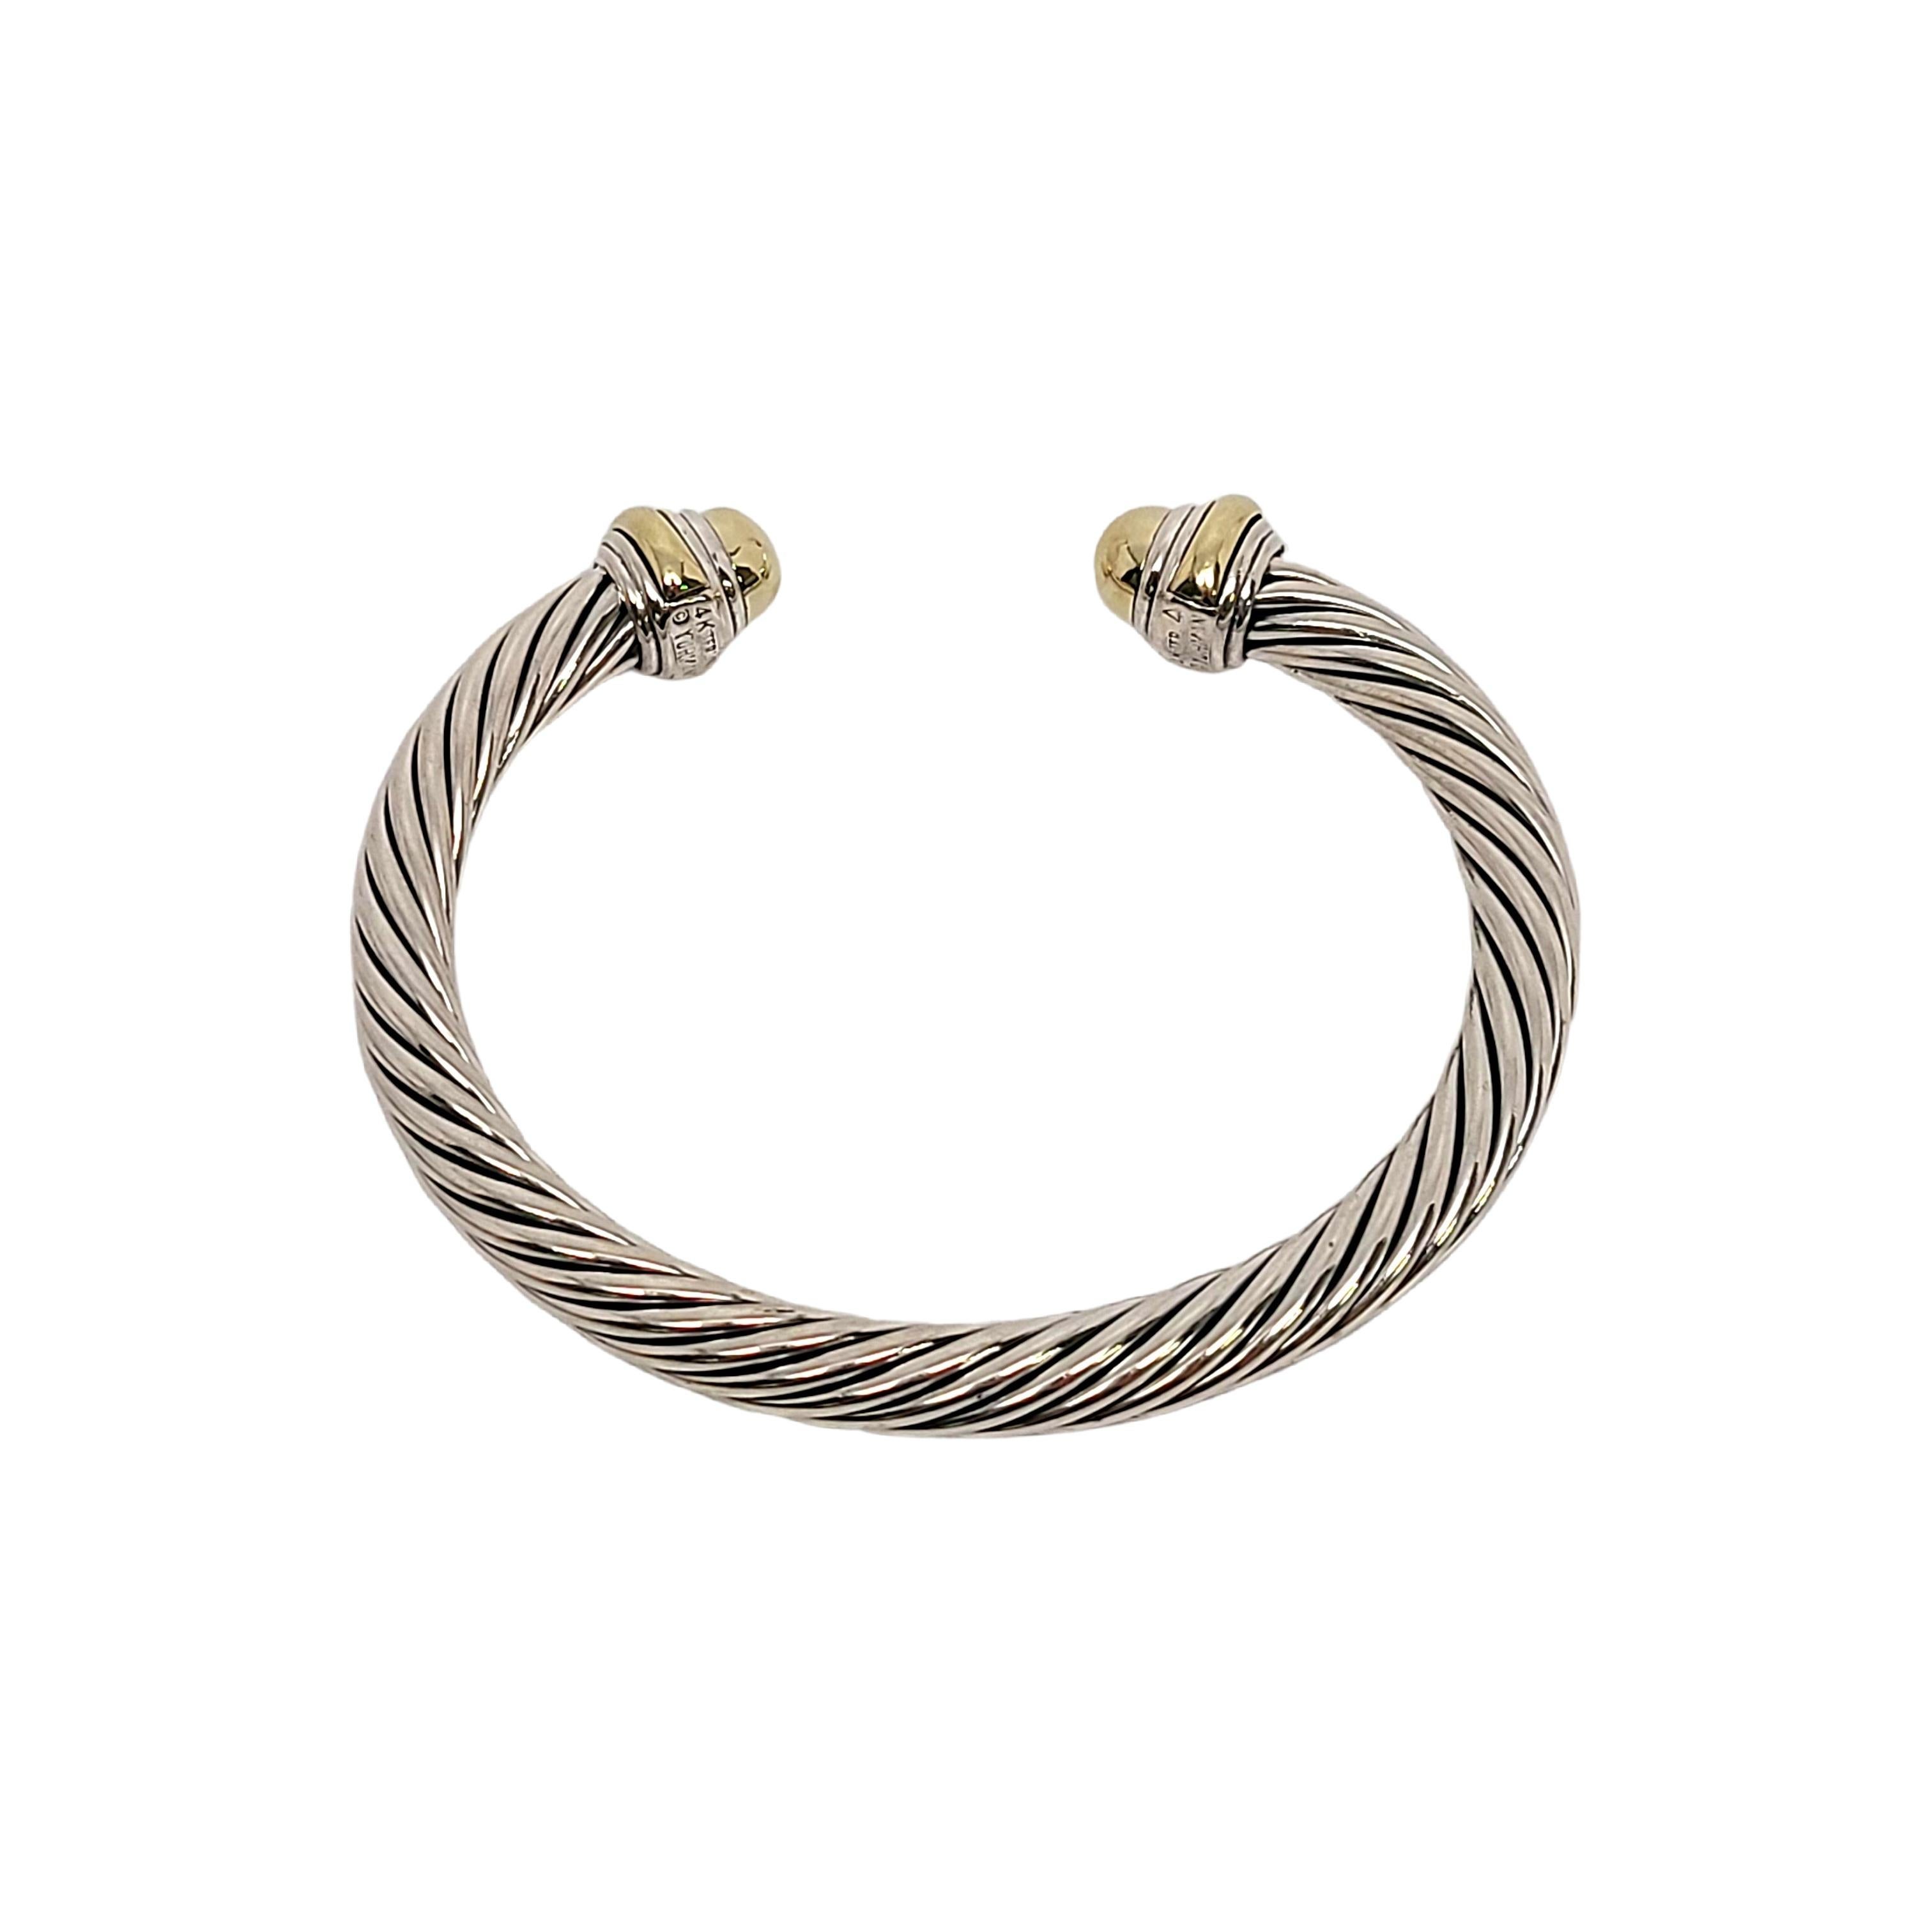 Sterling silver classic cable cuff 14K yellow gold domes cuff bracelet by David Yurman.

Features Yurman's classic cable design in sterling silver with 14K yellow gold accent domes at each end.

Measures approx 6